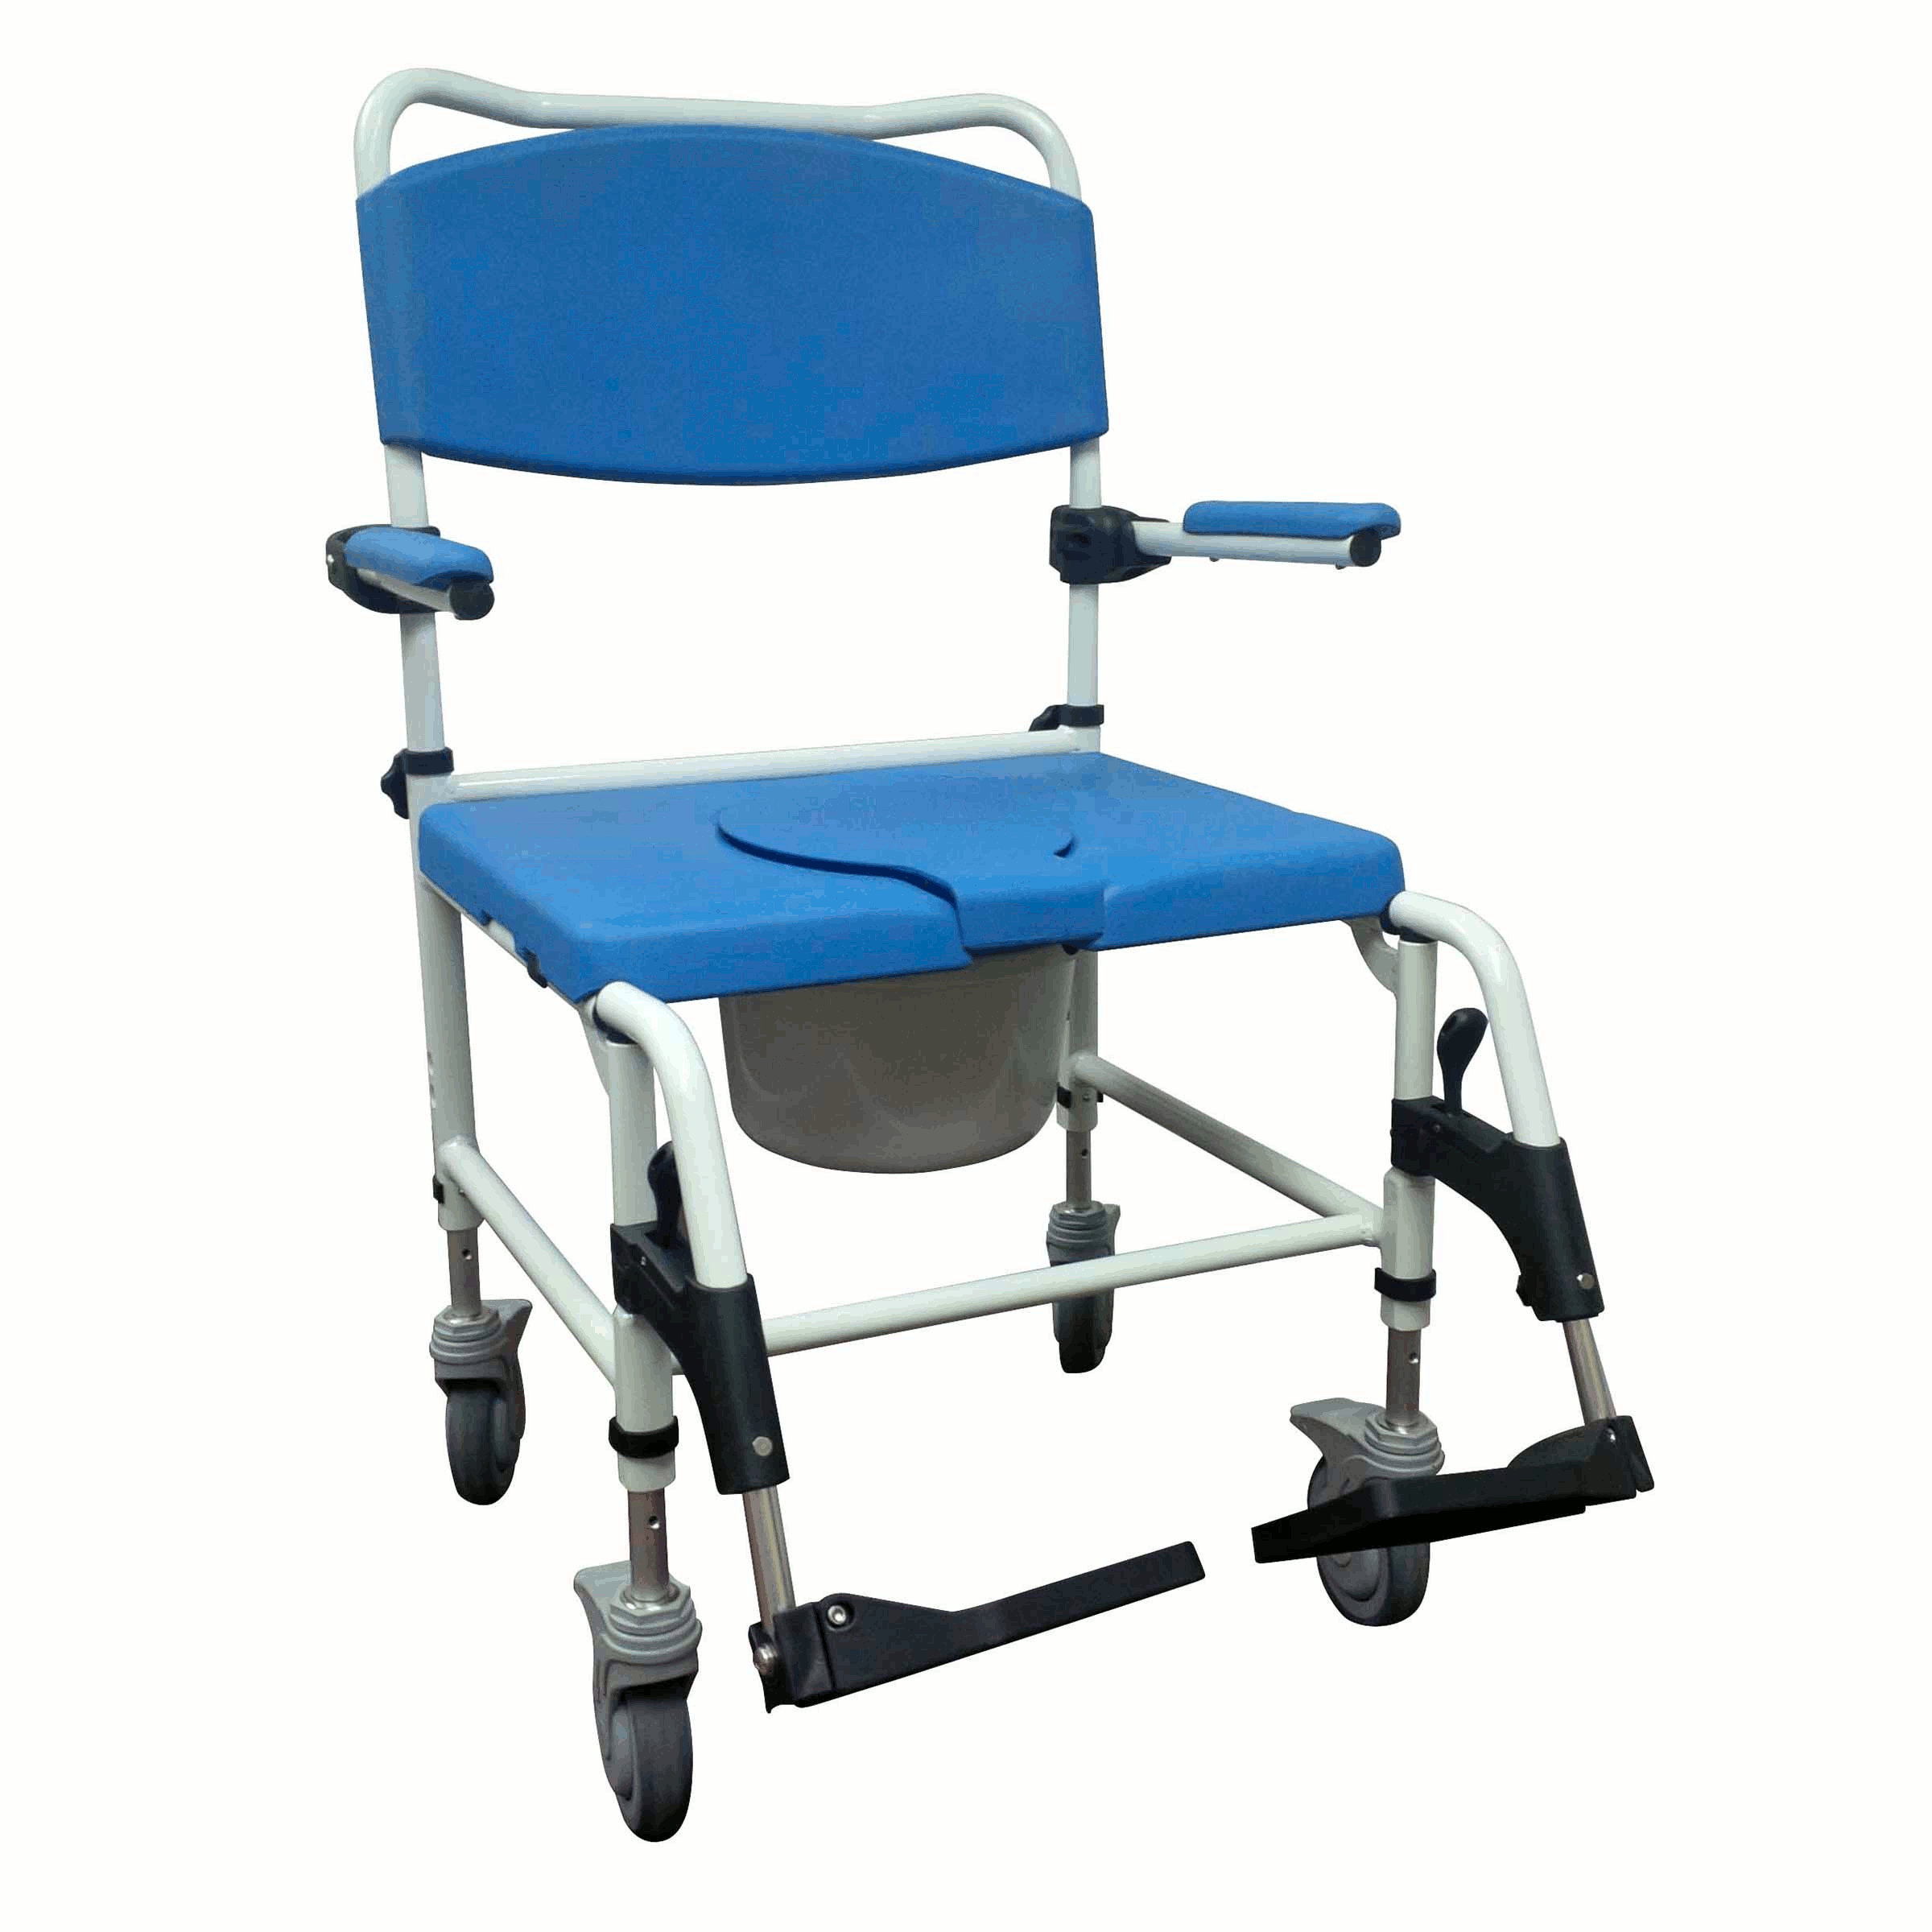 Bariatric Commode Chairs Products, Supplies and Equipment